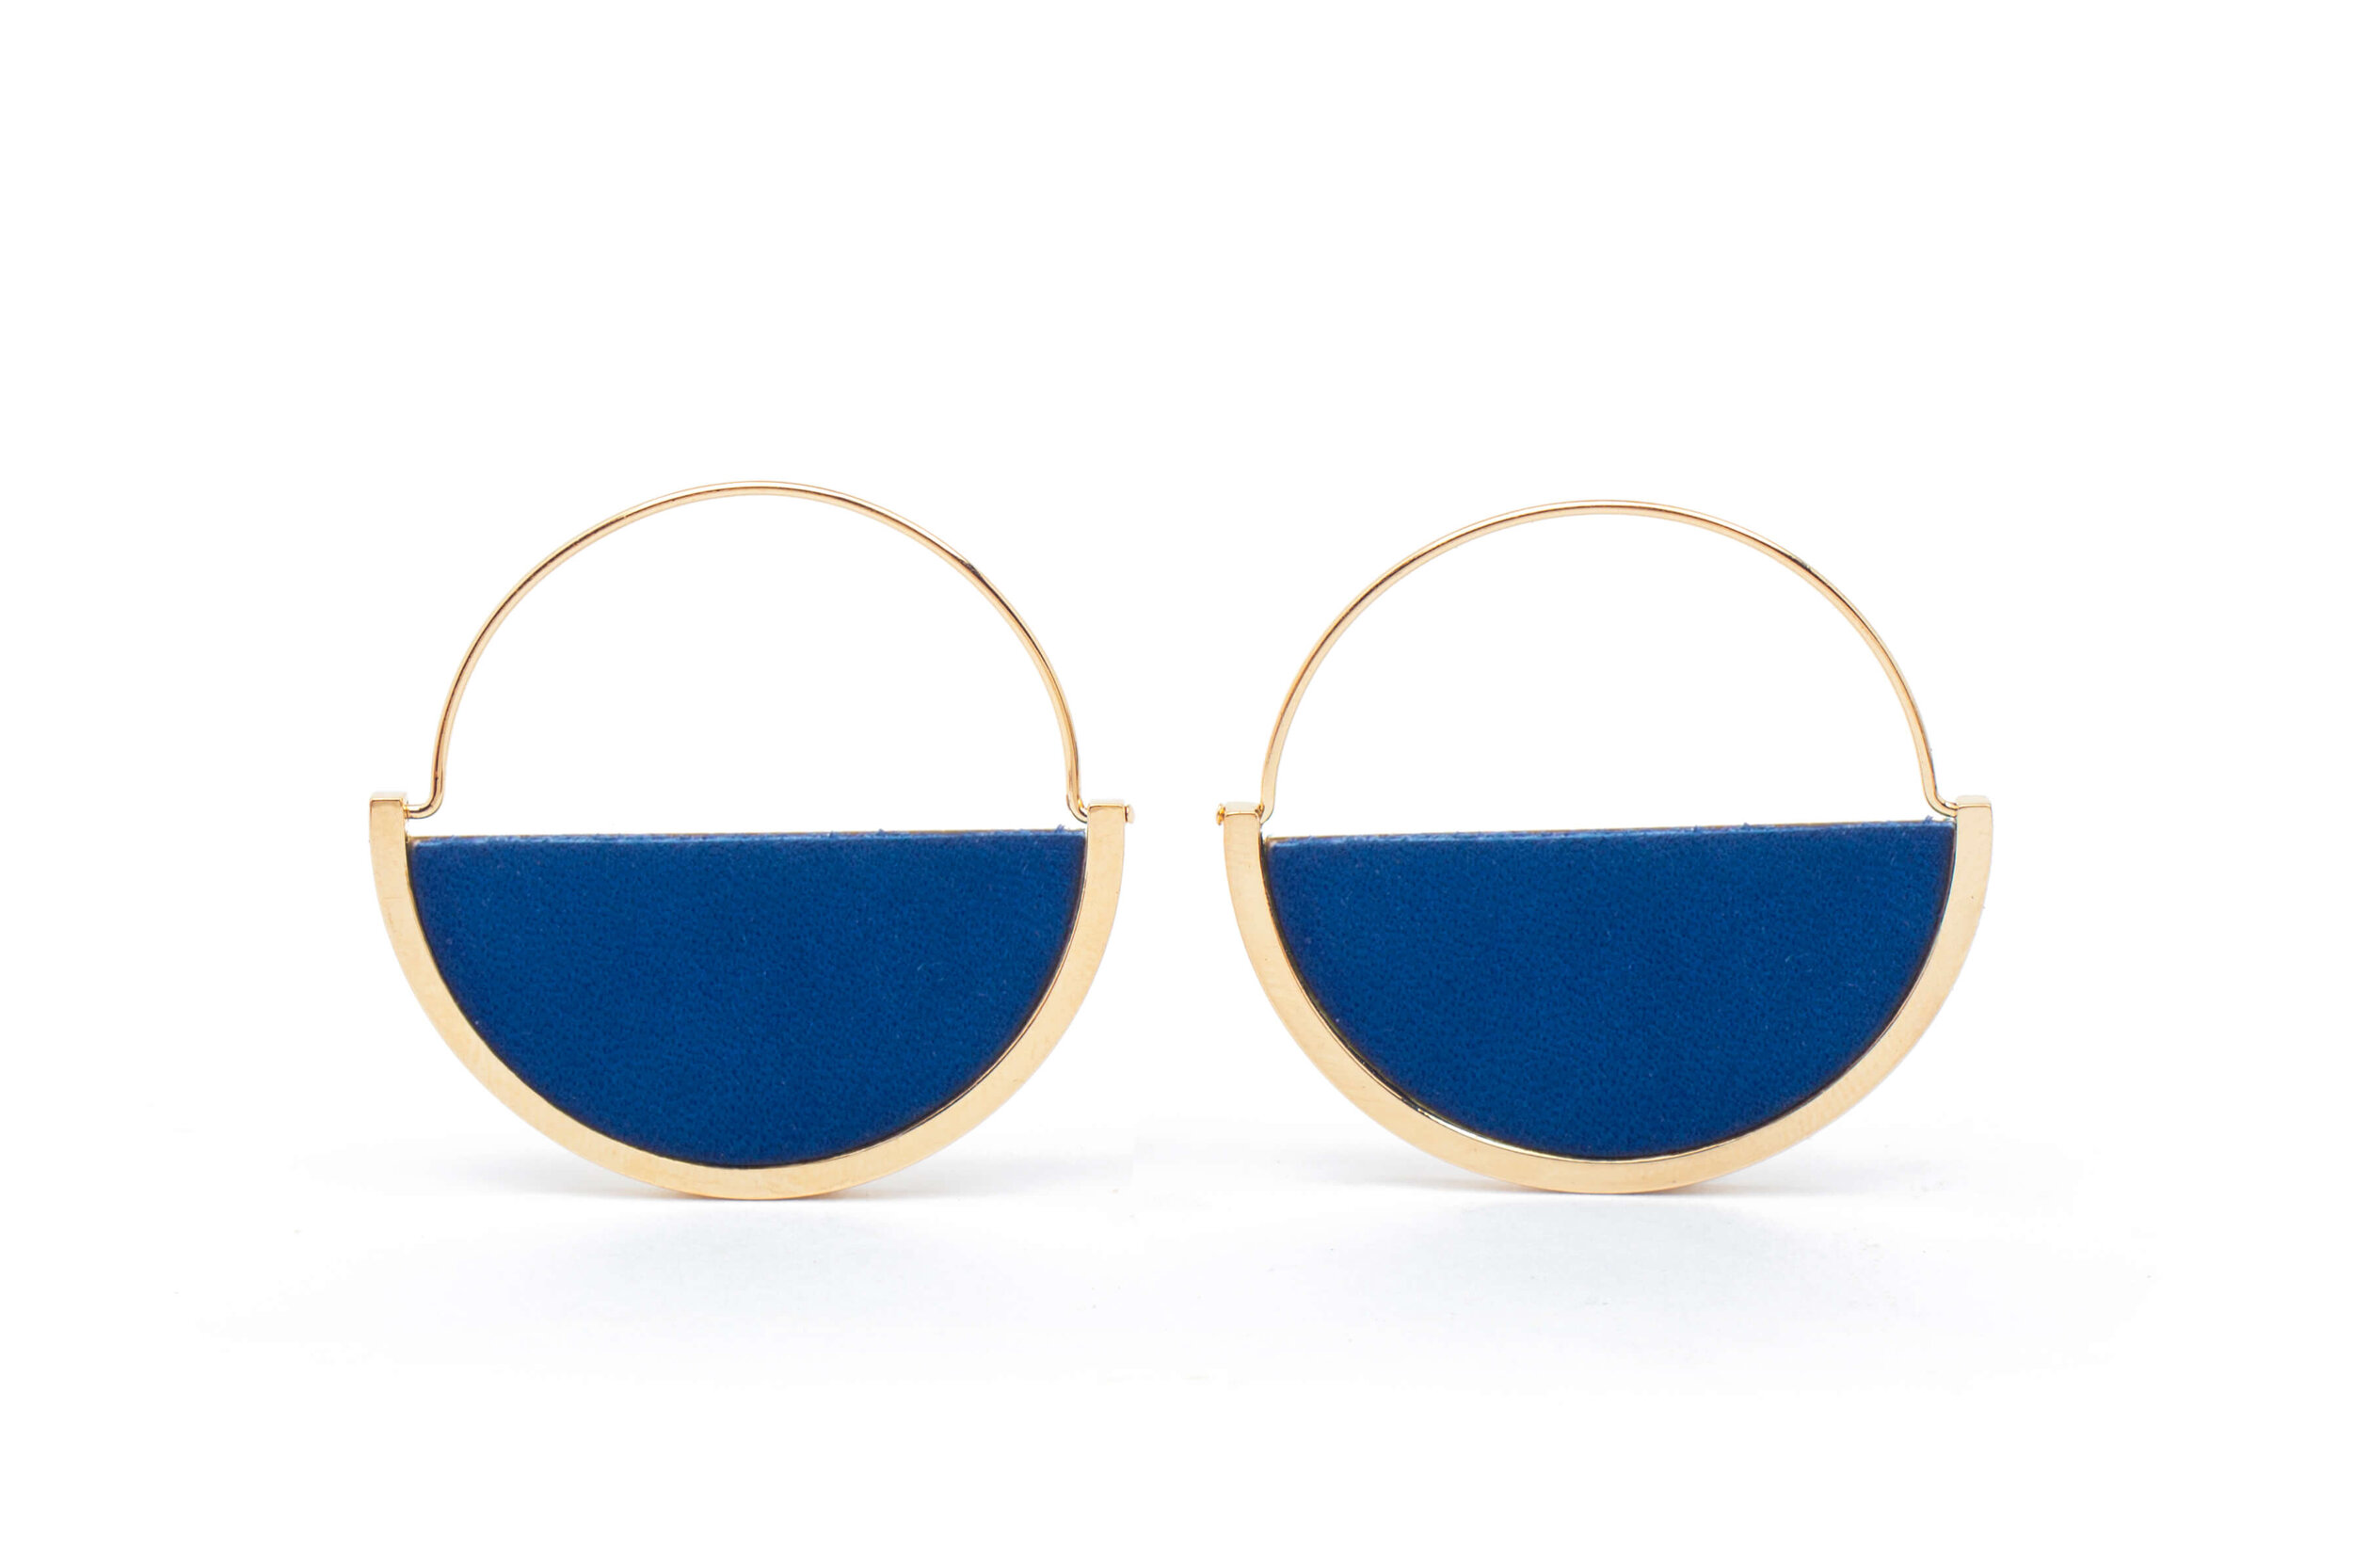 Earrings - Collection Demi-Lune in blue leather and golden brass Size L - Pascaline Viraben